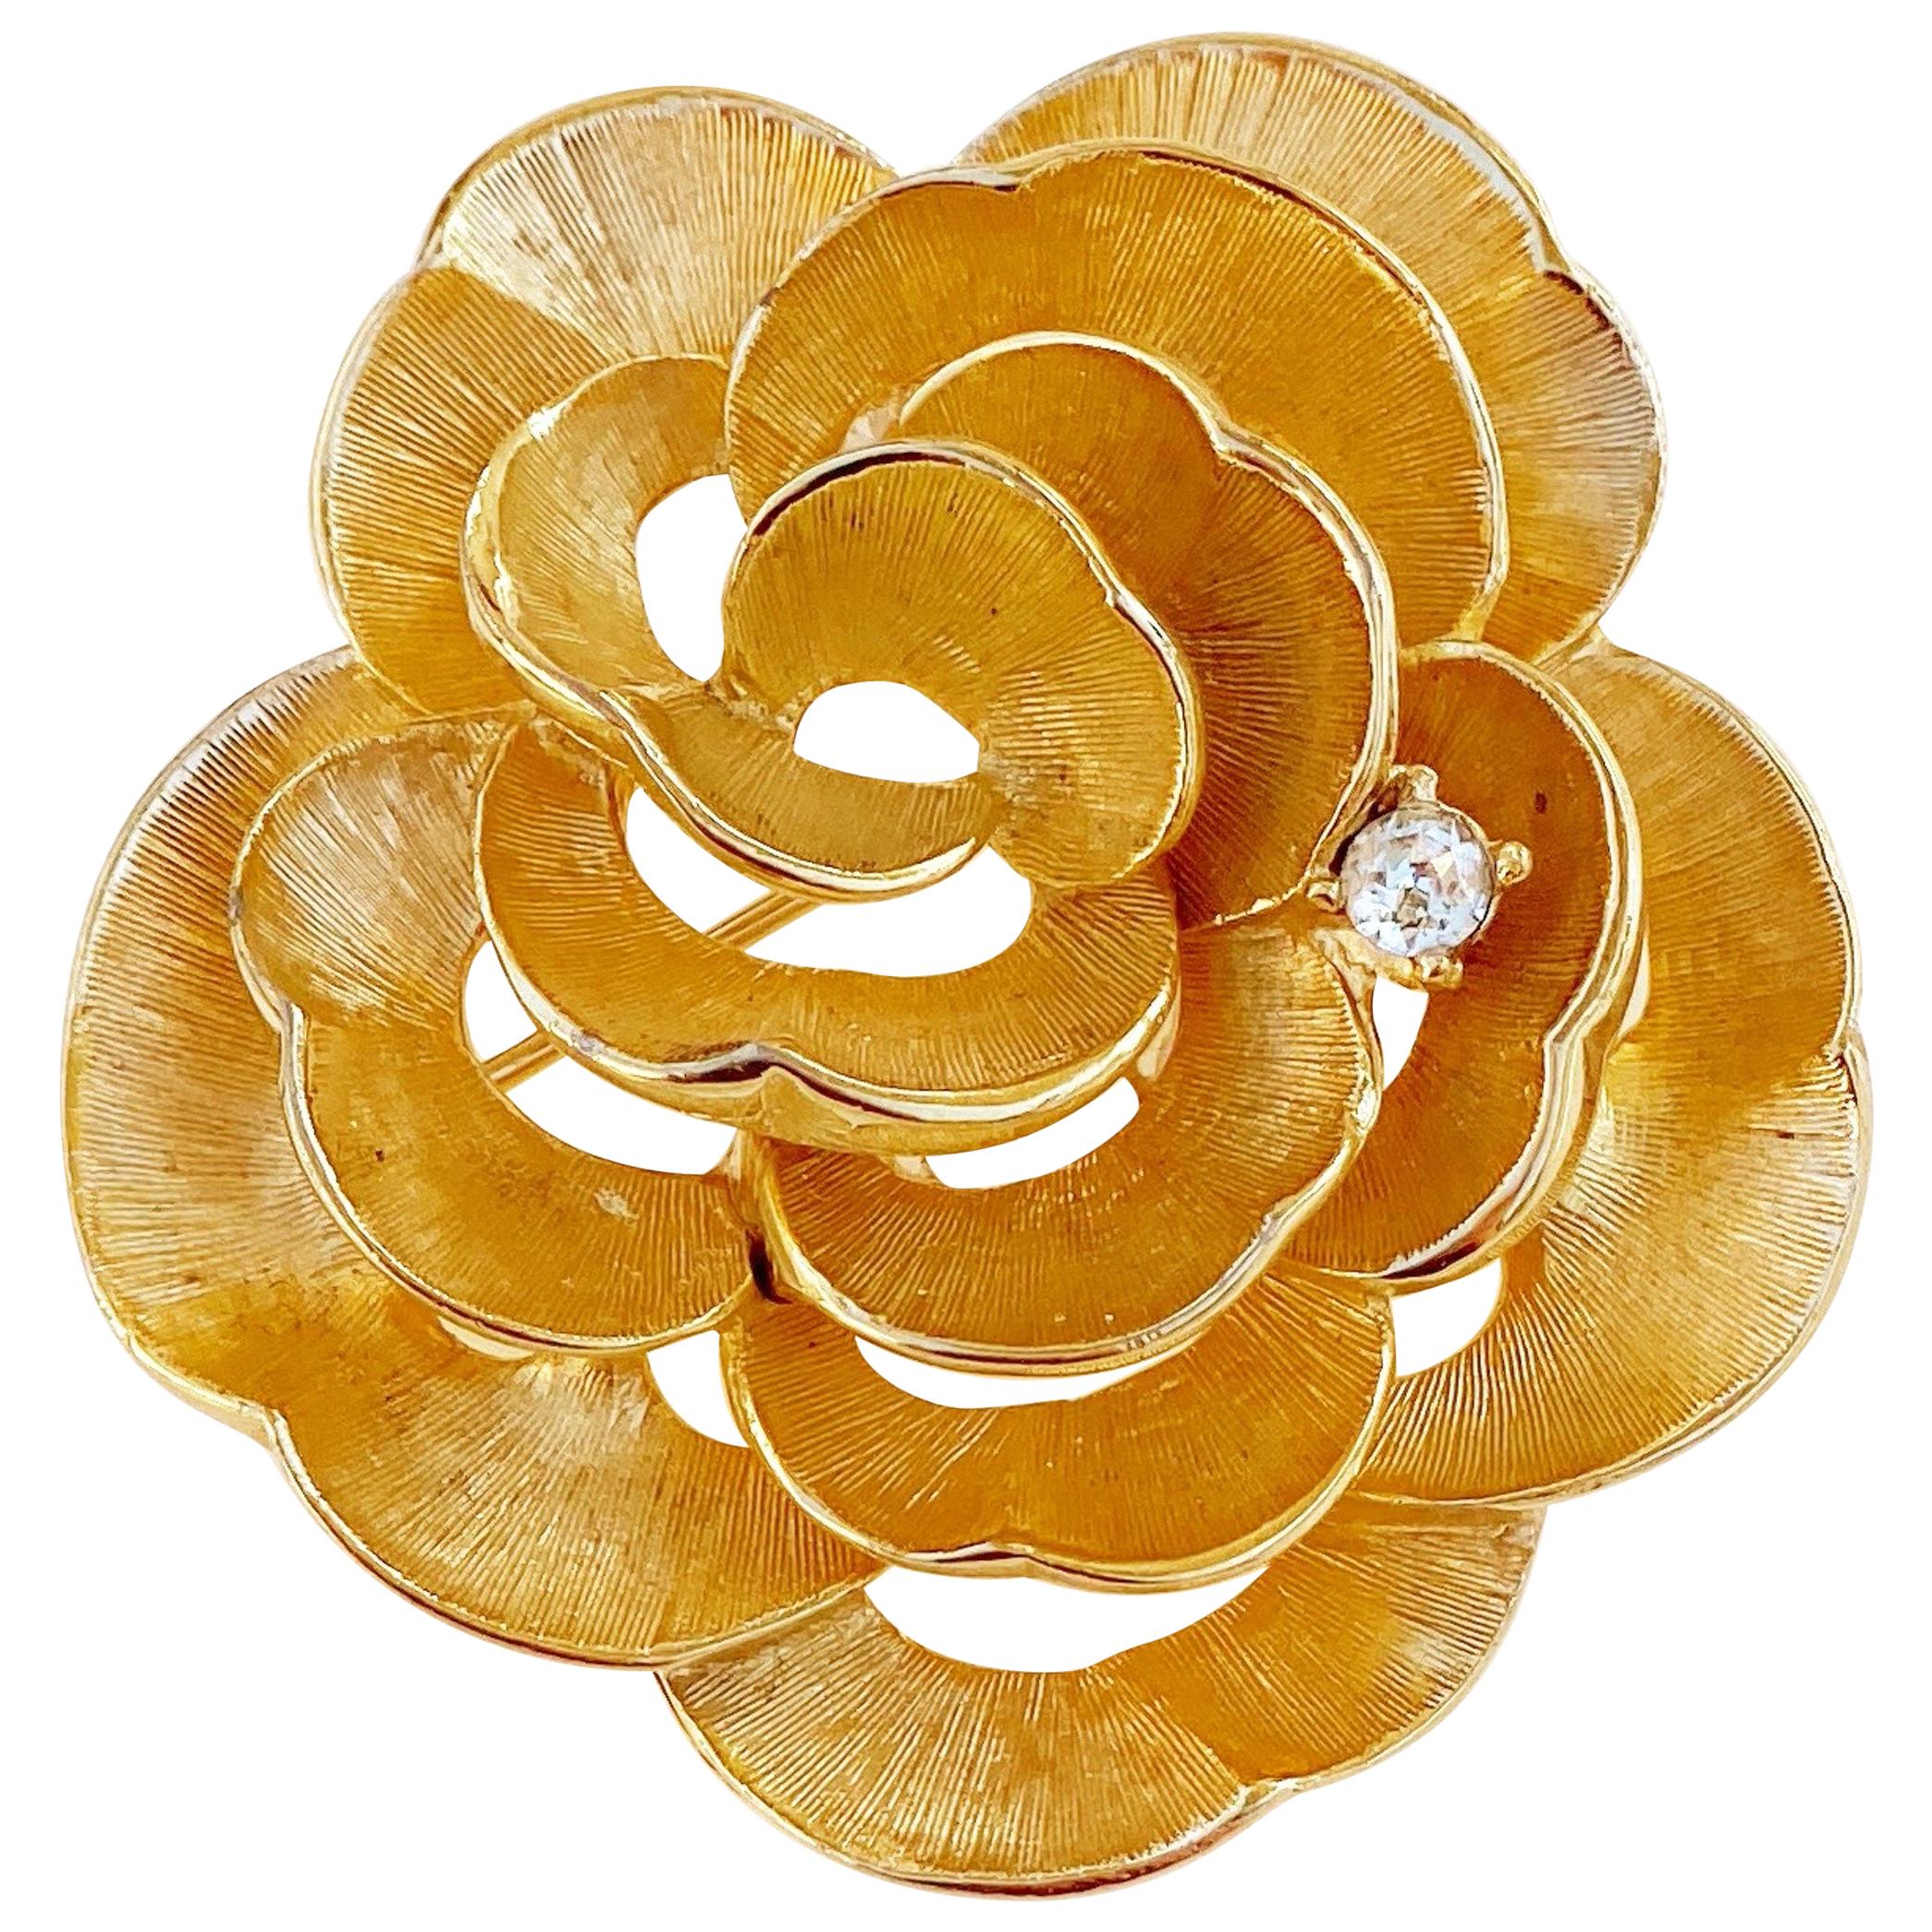 1960s Gilded Rose Flower Figural Brooch w Crystal Accent By Marcel Boucher